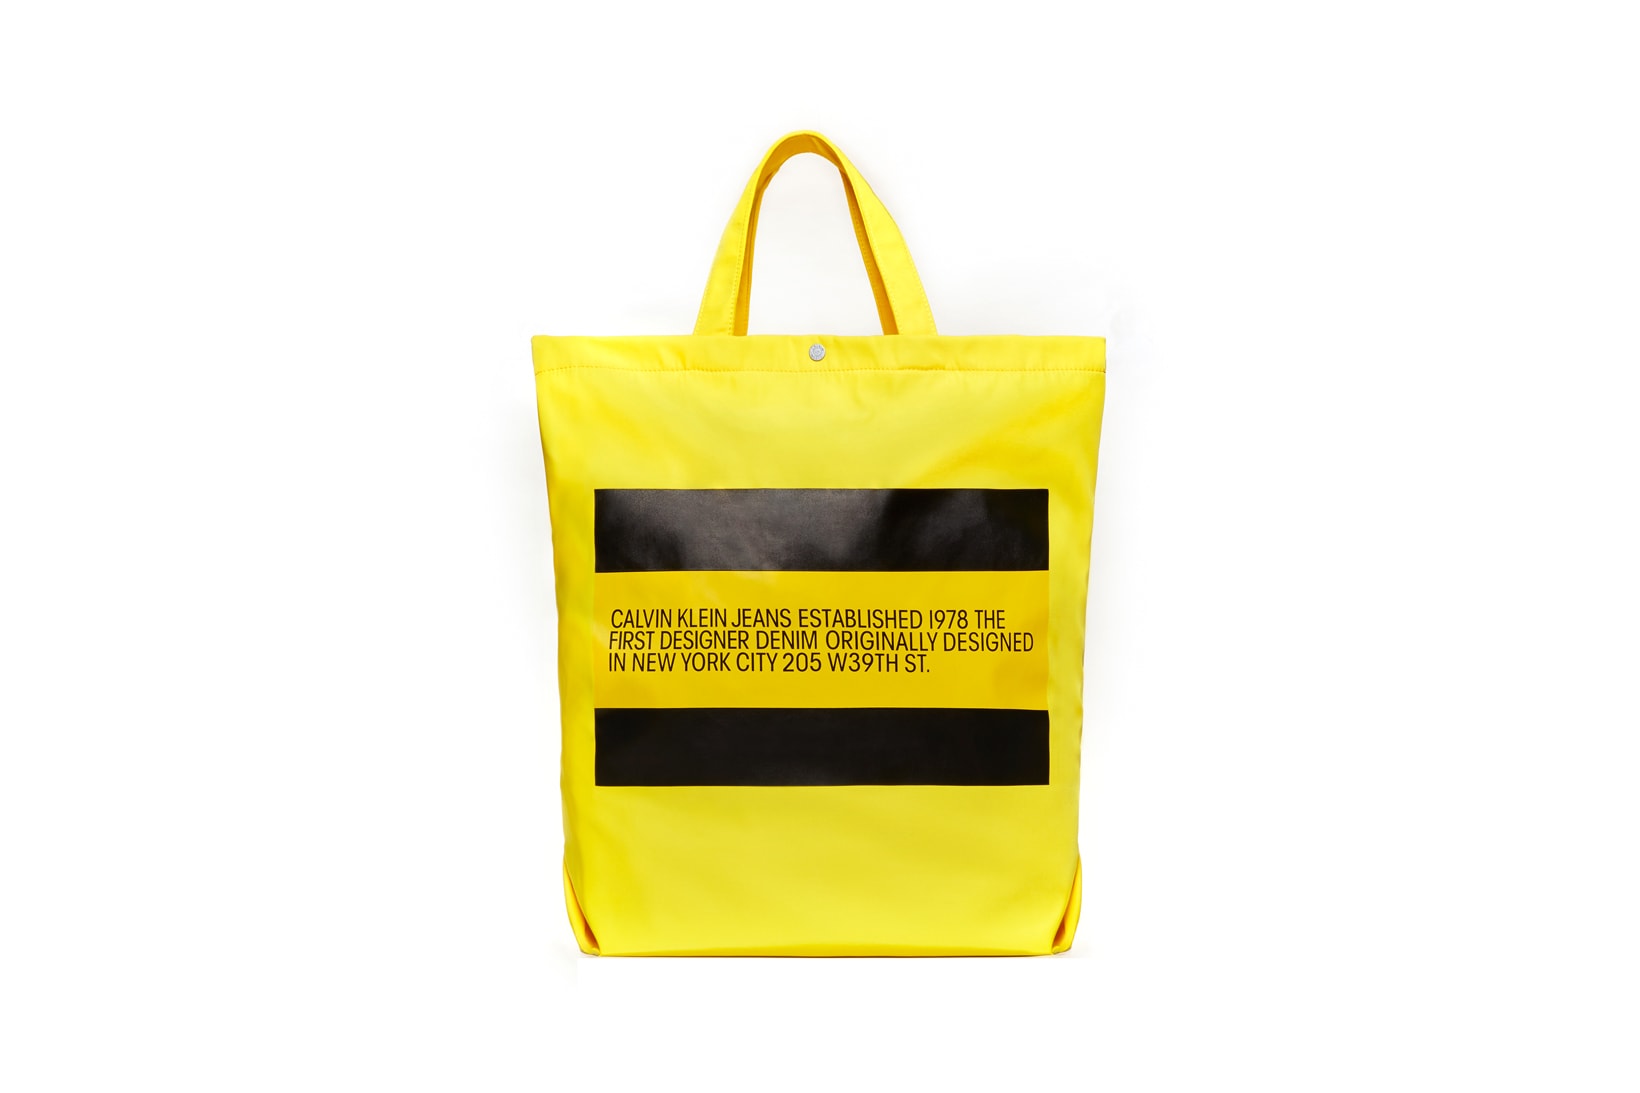 CALVIN KLEIN JEANS EST. 1978 Delivery 2 Drop 02 Tote Yellow